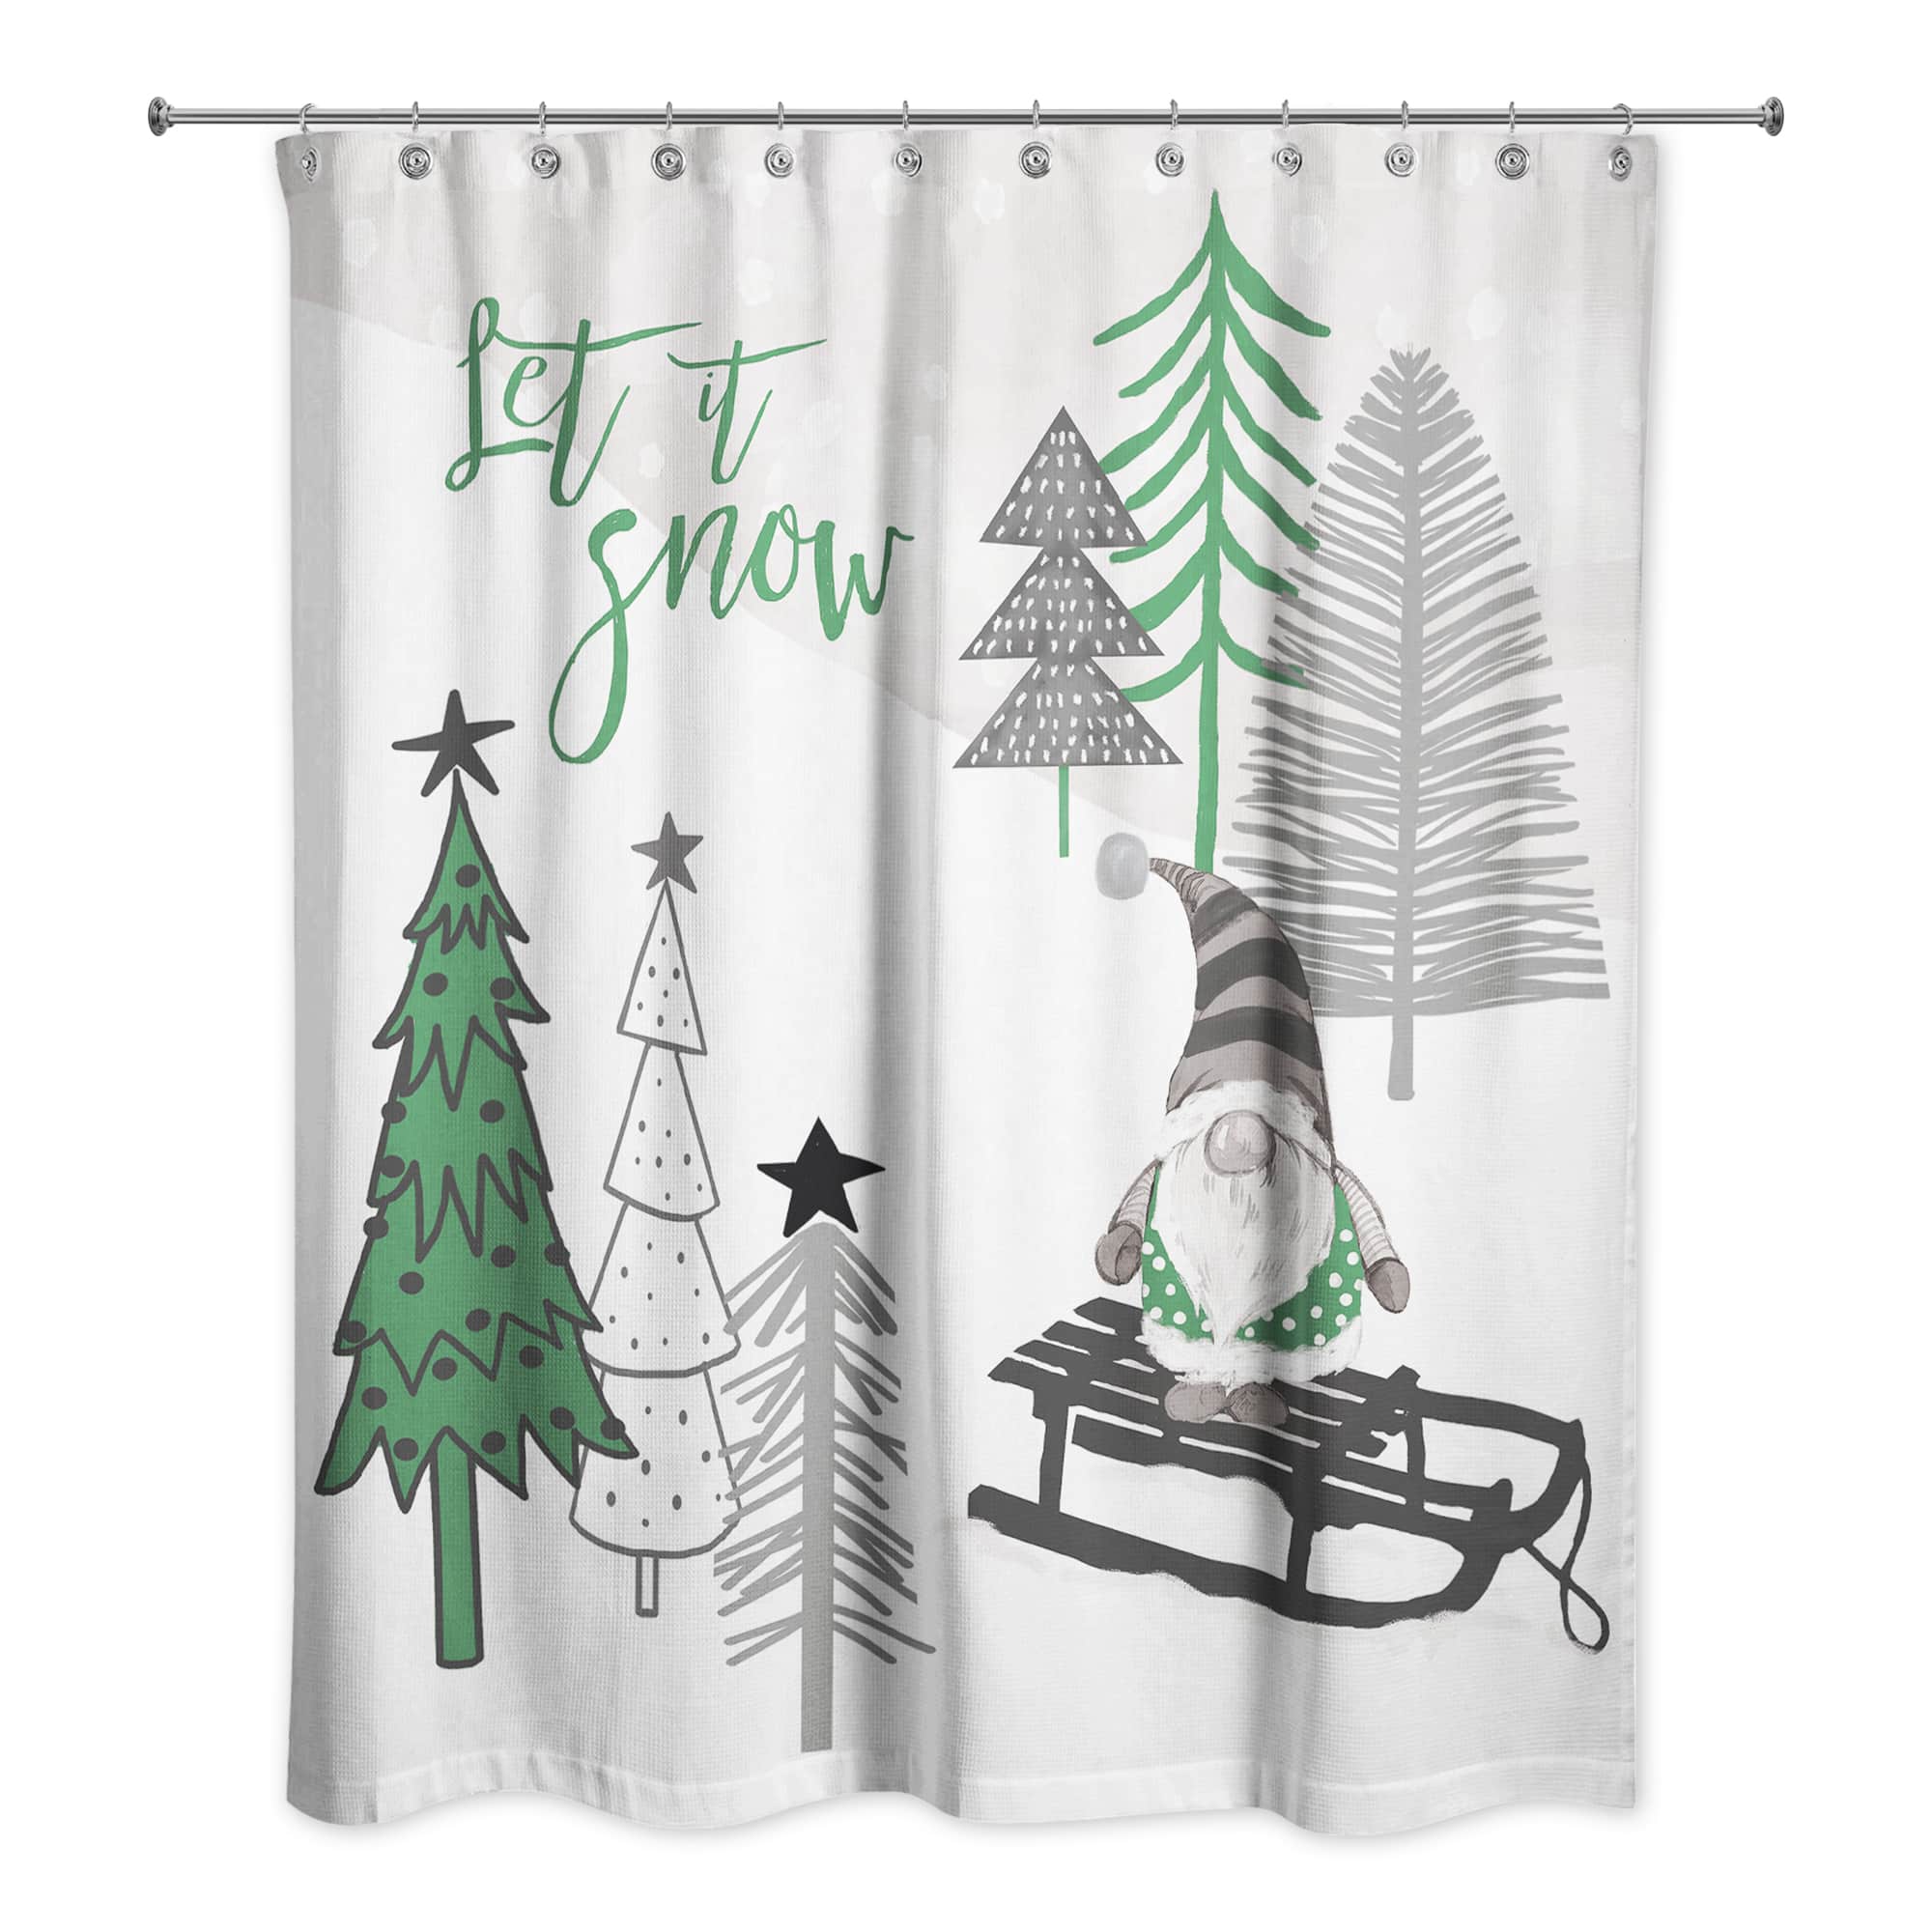 Let It Snow Tree Gnome Shower Curtain